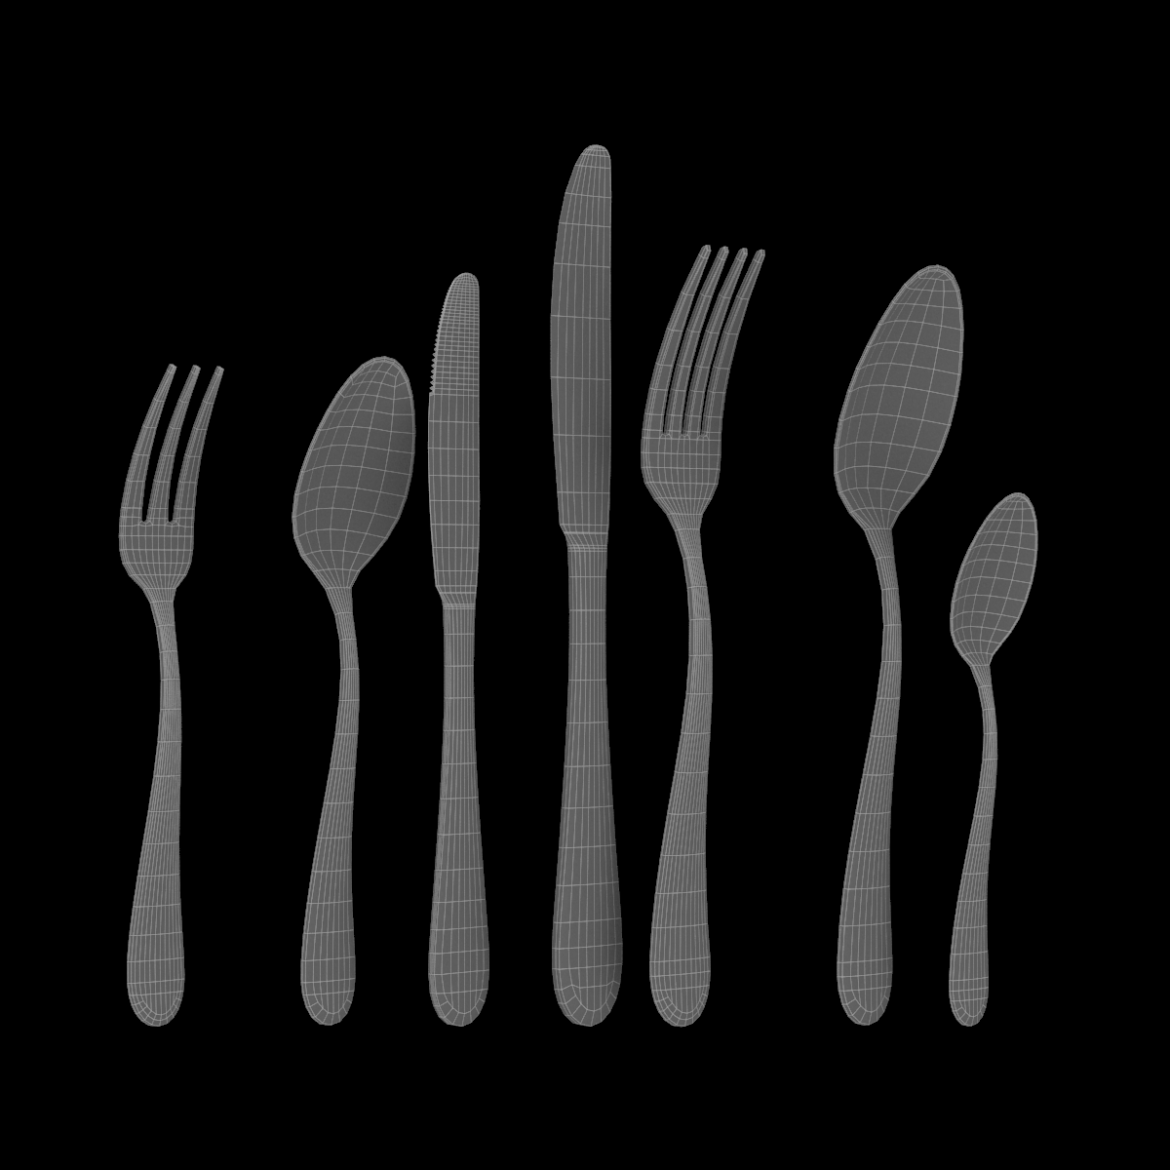  <a class="continue" href="https://www.flatpyramid.com/3d-models/furniture-3d-models/cookware-and-tableware/utensils/common-cutlery-set-7-pieces/">Continue Reading<span> Common Cutlery Set 7 Pieces</span></a>